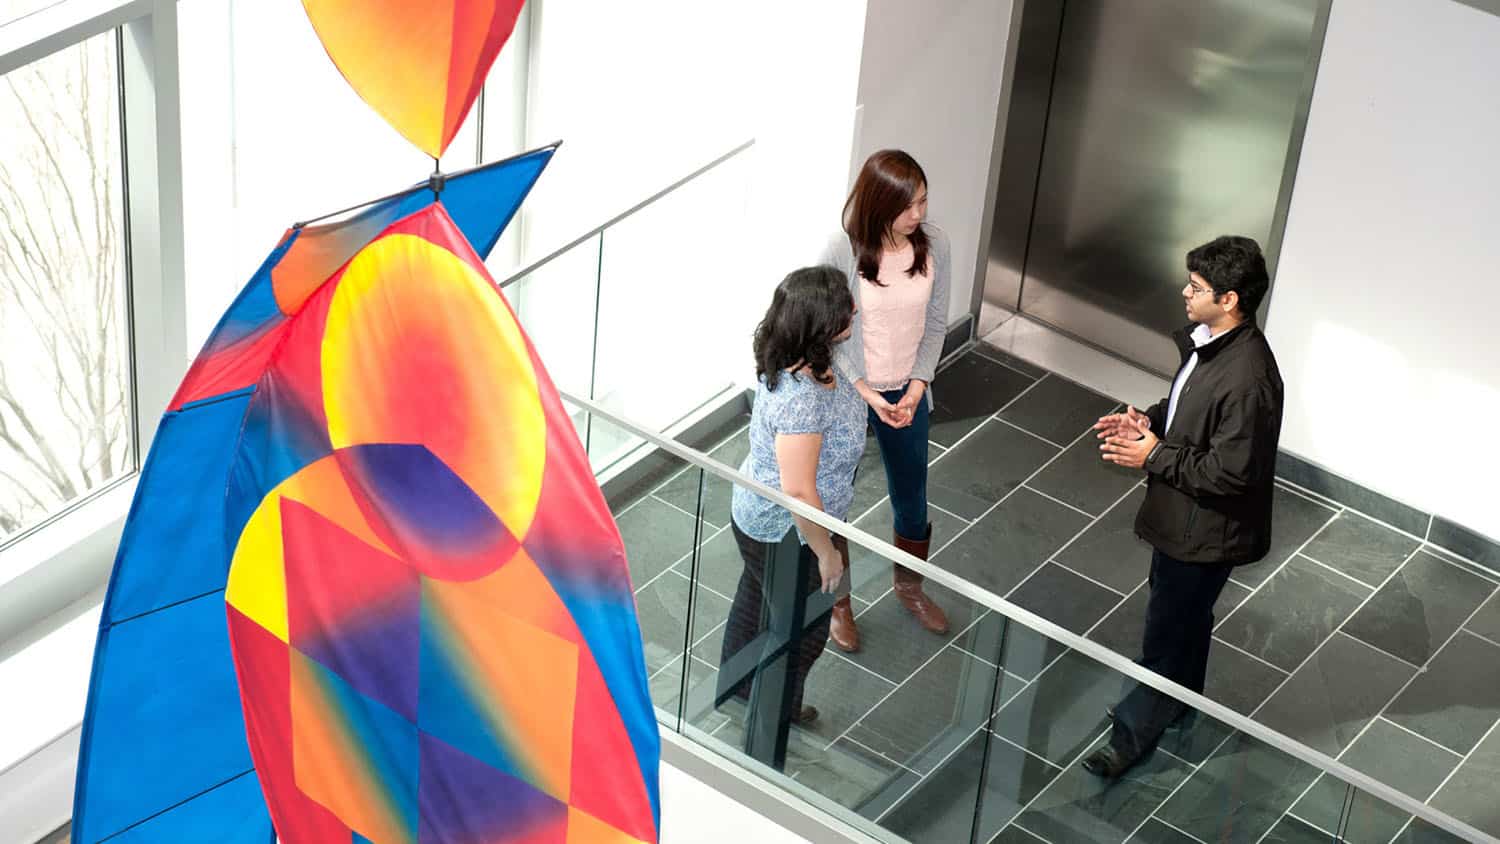 Three people talk in the Atrium of SAS Hall with a colorful art installation in the foreground